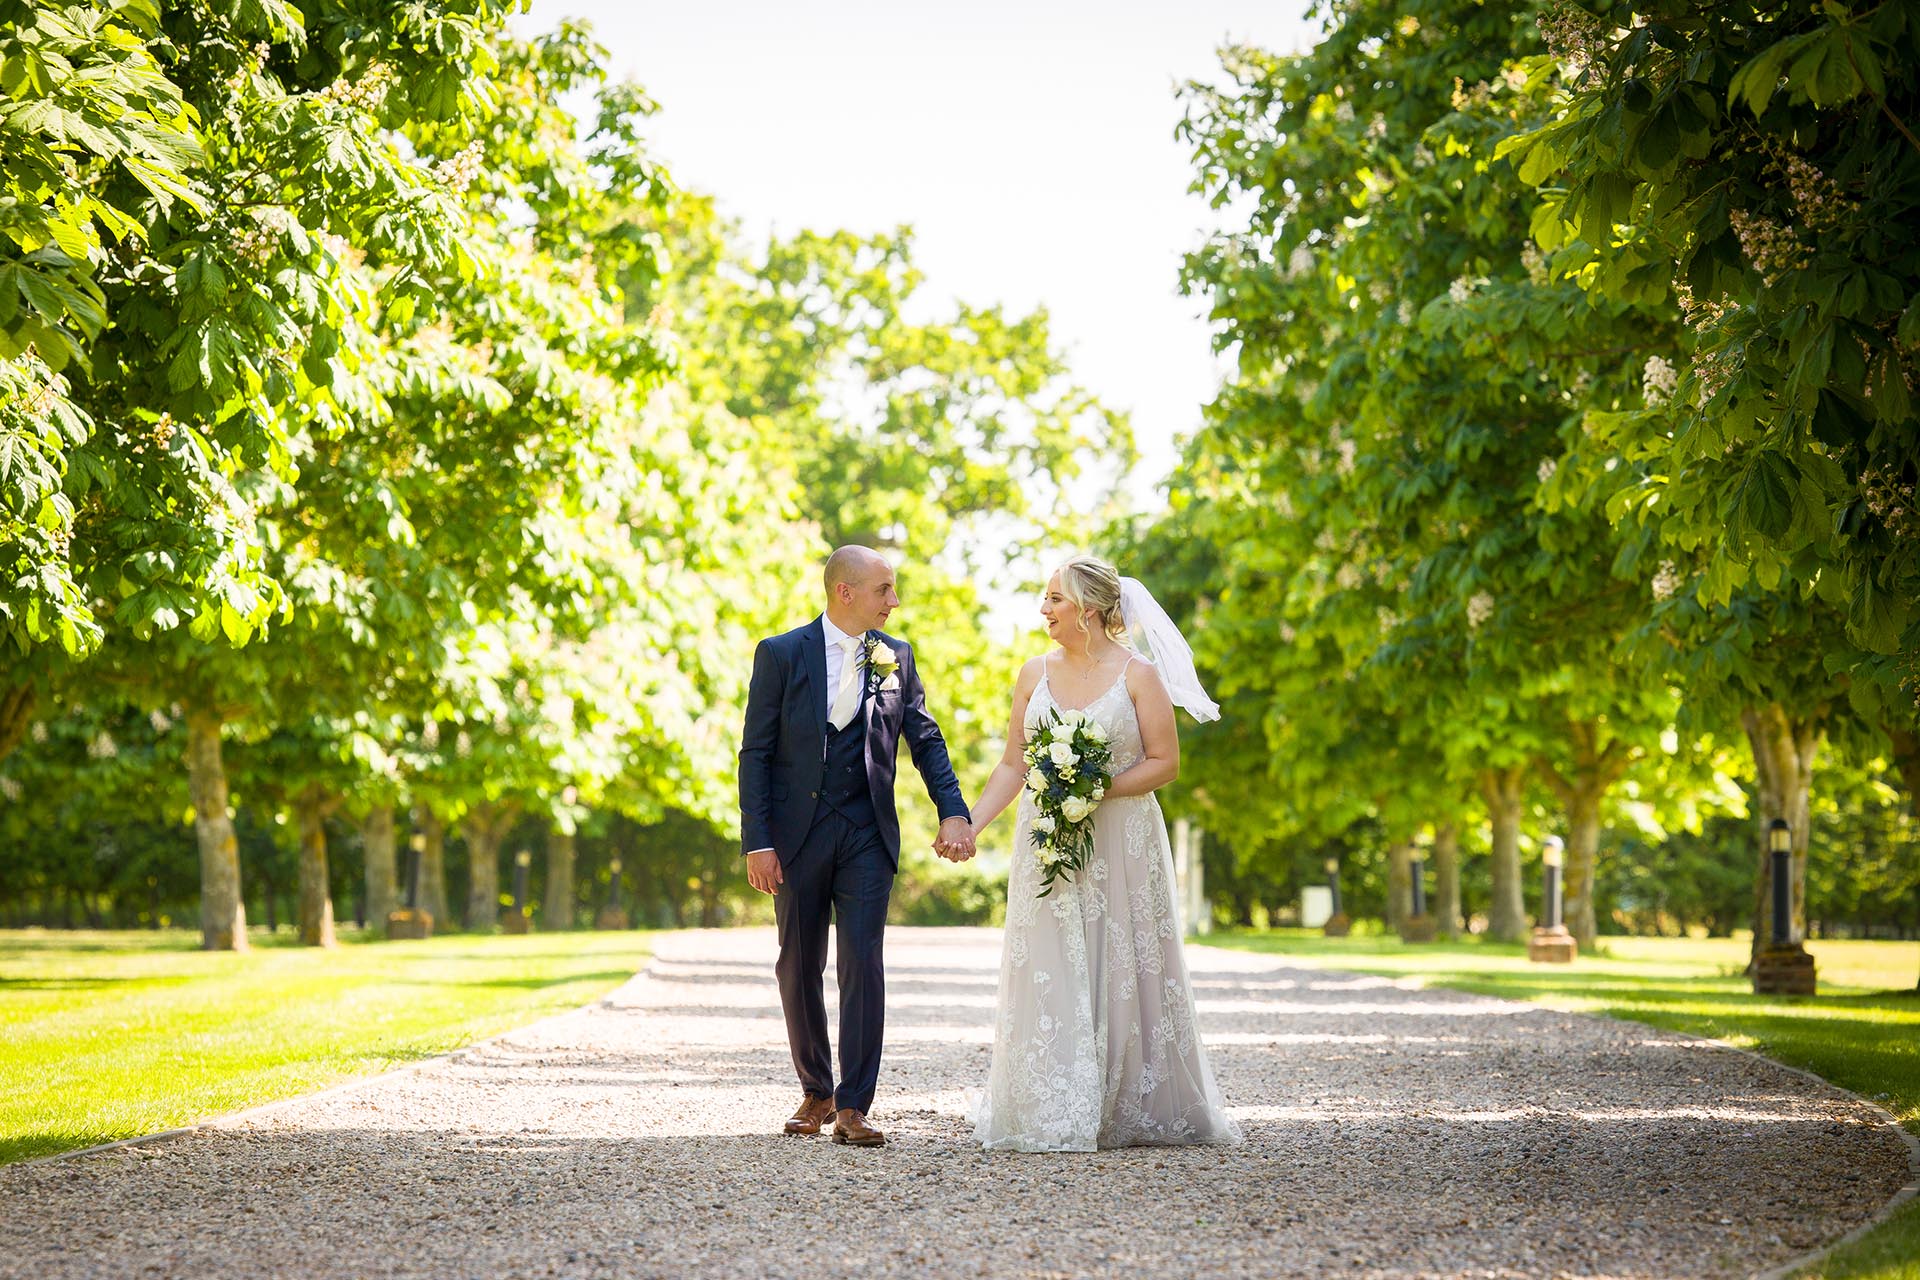 Bride and groom photograph by Essex wedding photographer at Vaulty Manor Maldon